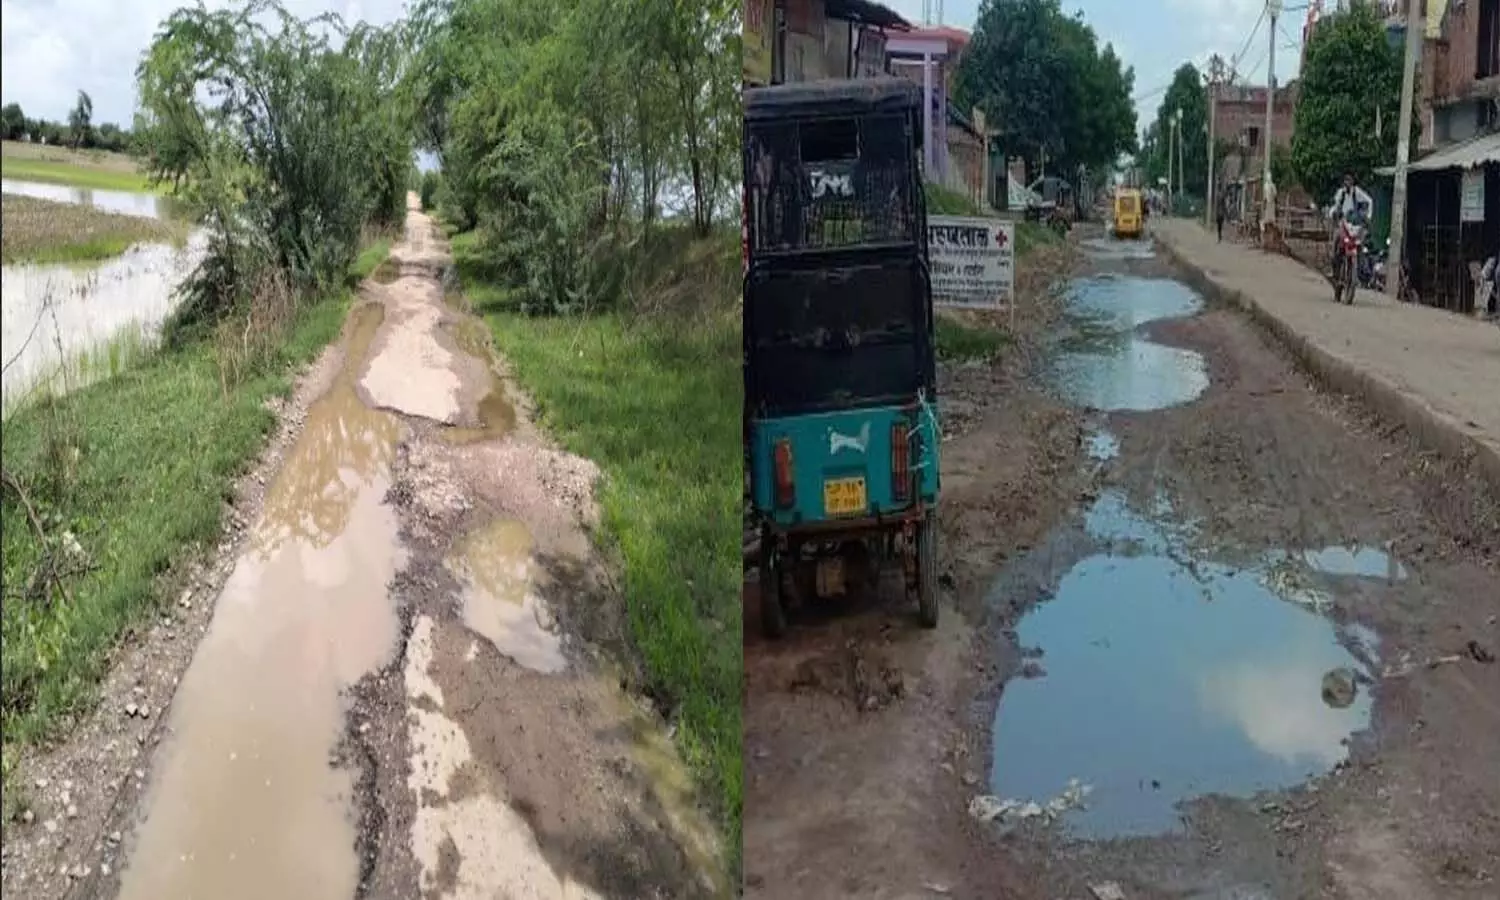 In Hamirpur, due to rain, potholes in the roads or roads in potholes, it is difficult to say